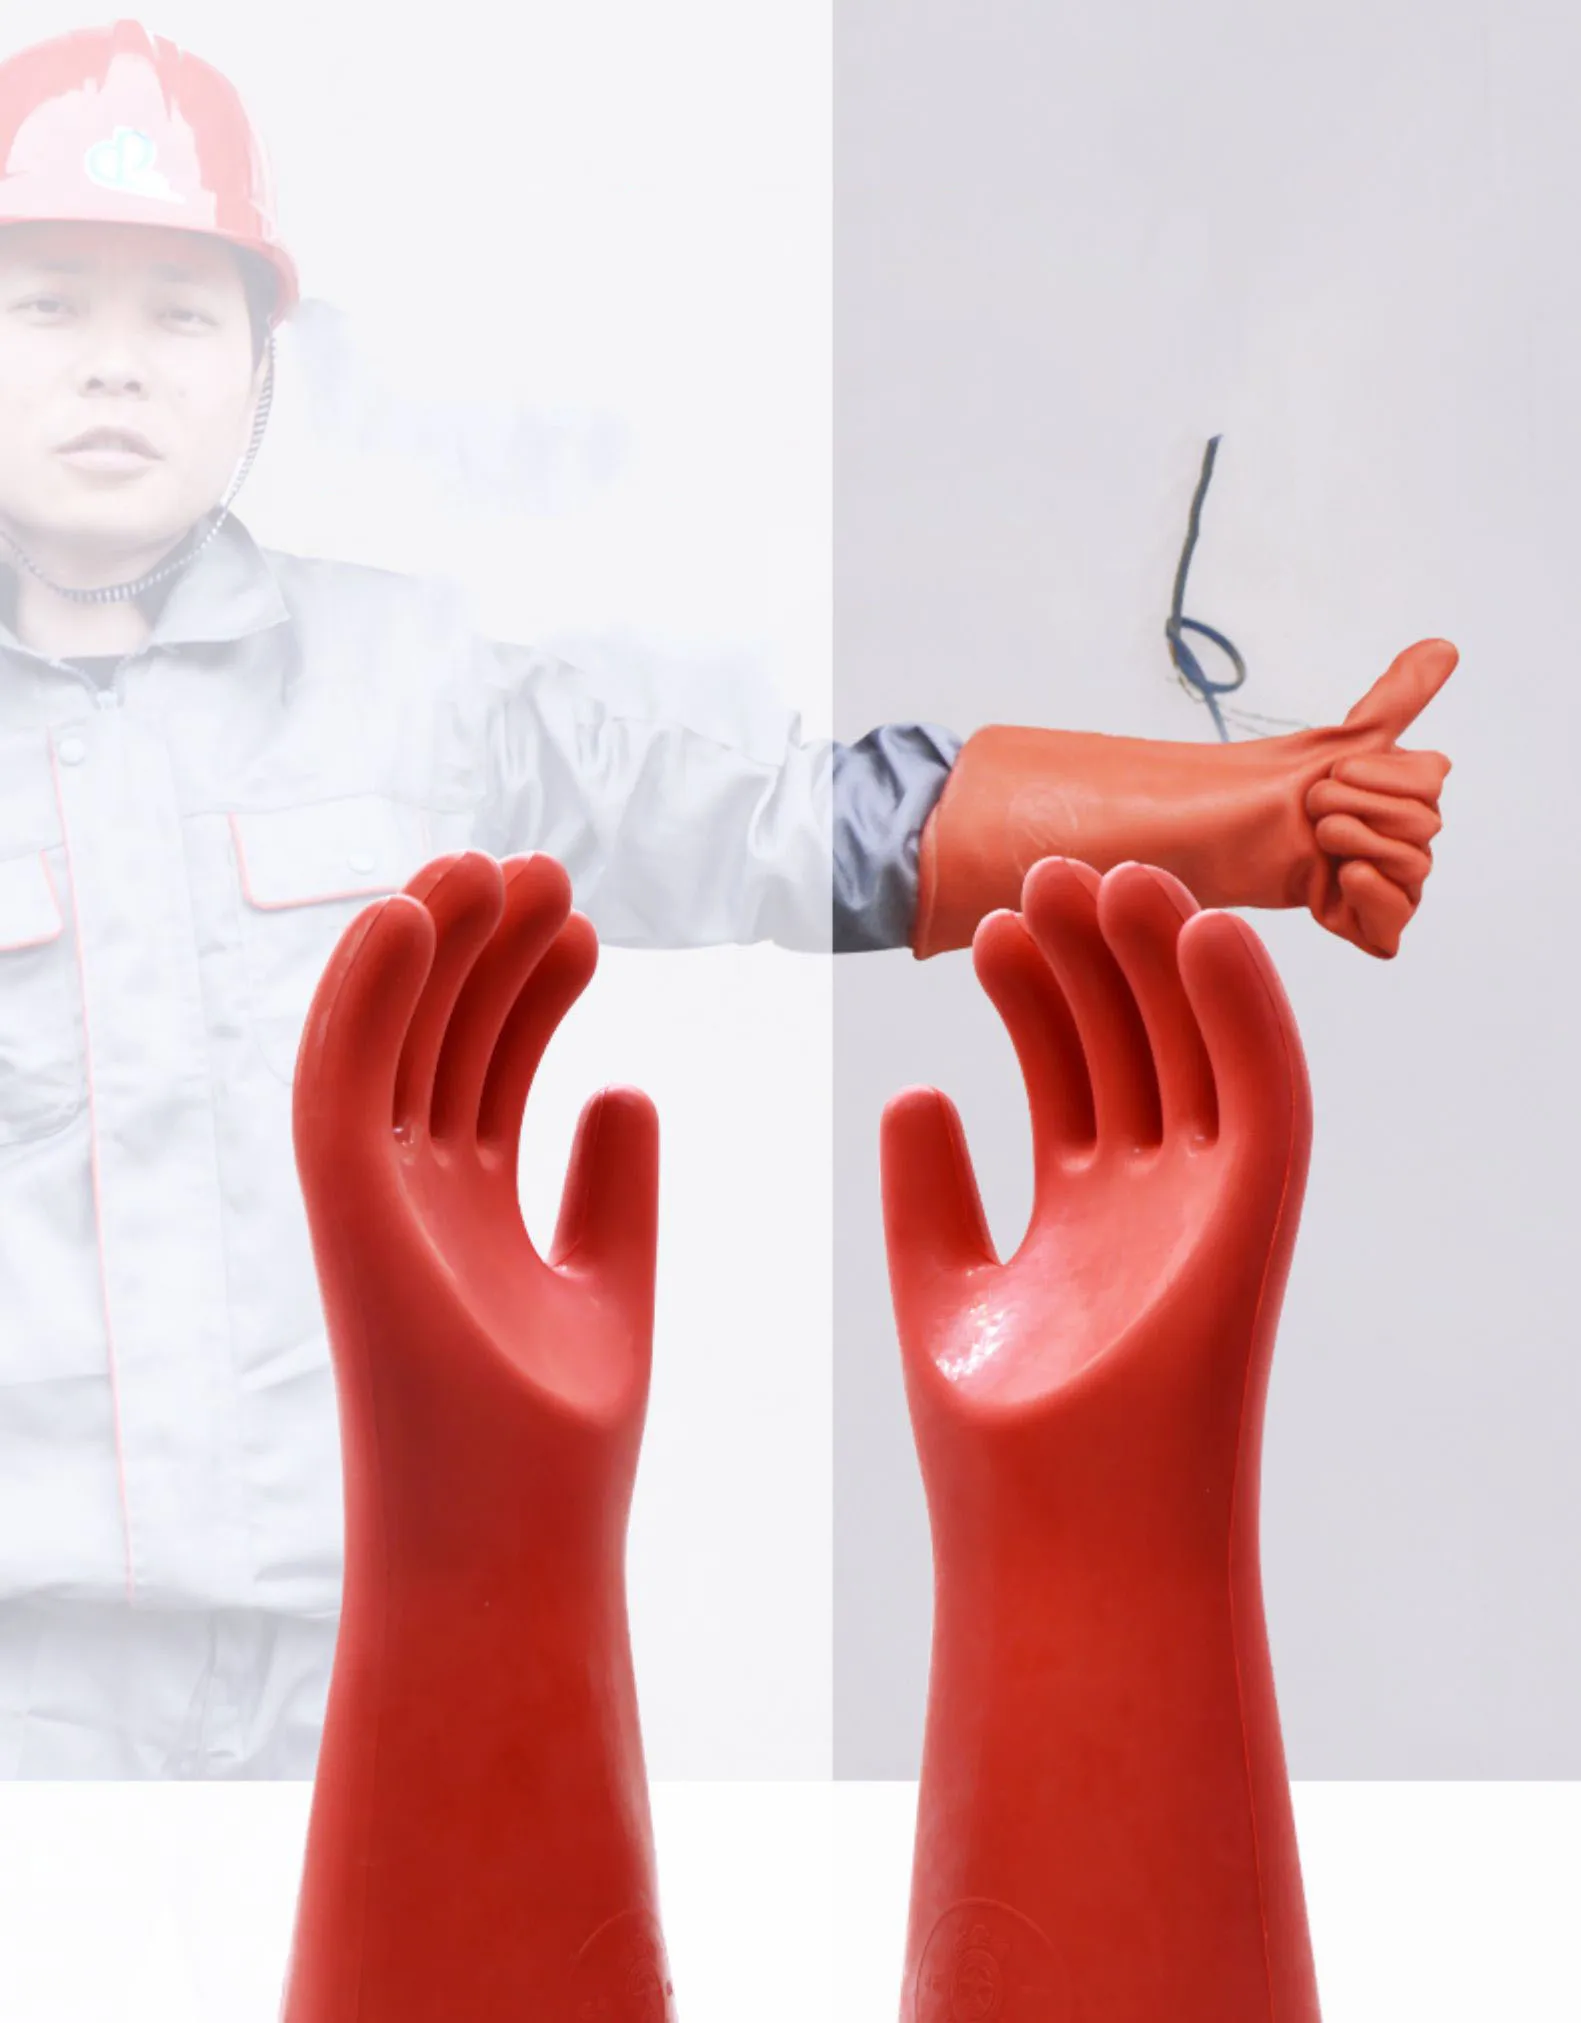 

Insulated Gloves Electrician Gloves Rubber Gloves 12KV Protective Work Gloves Laber Protection High Voltage Safety Insulating